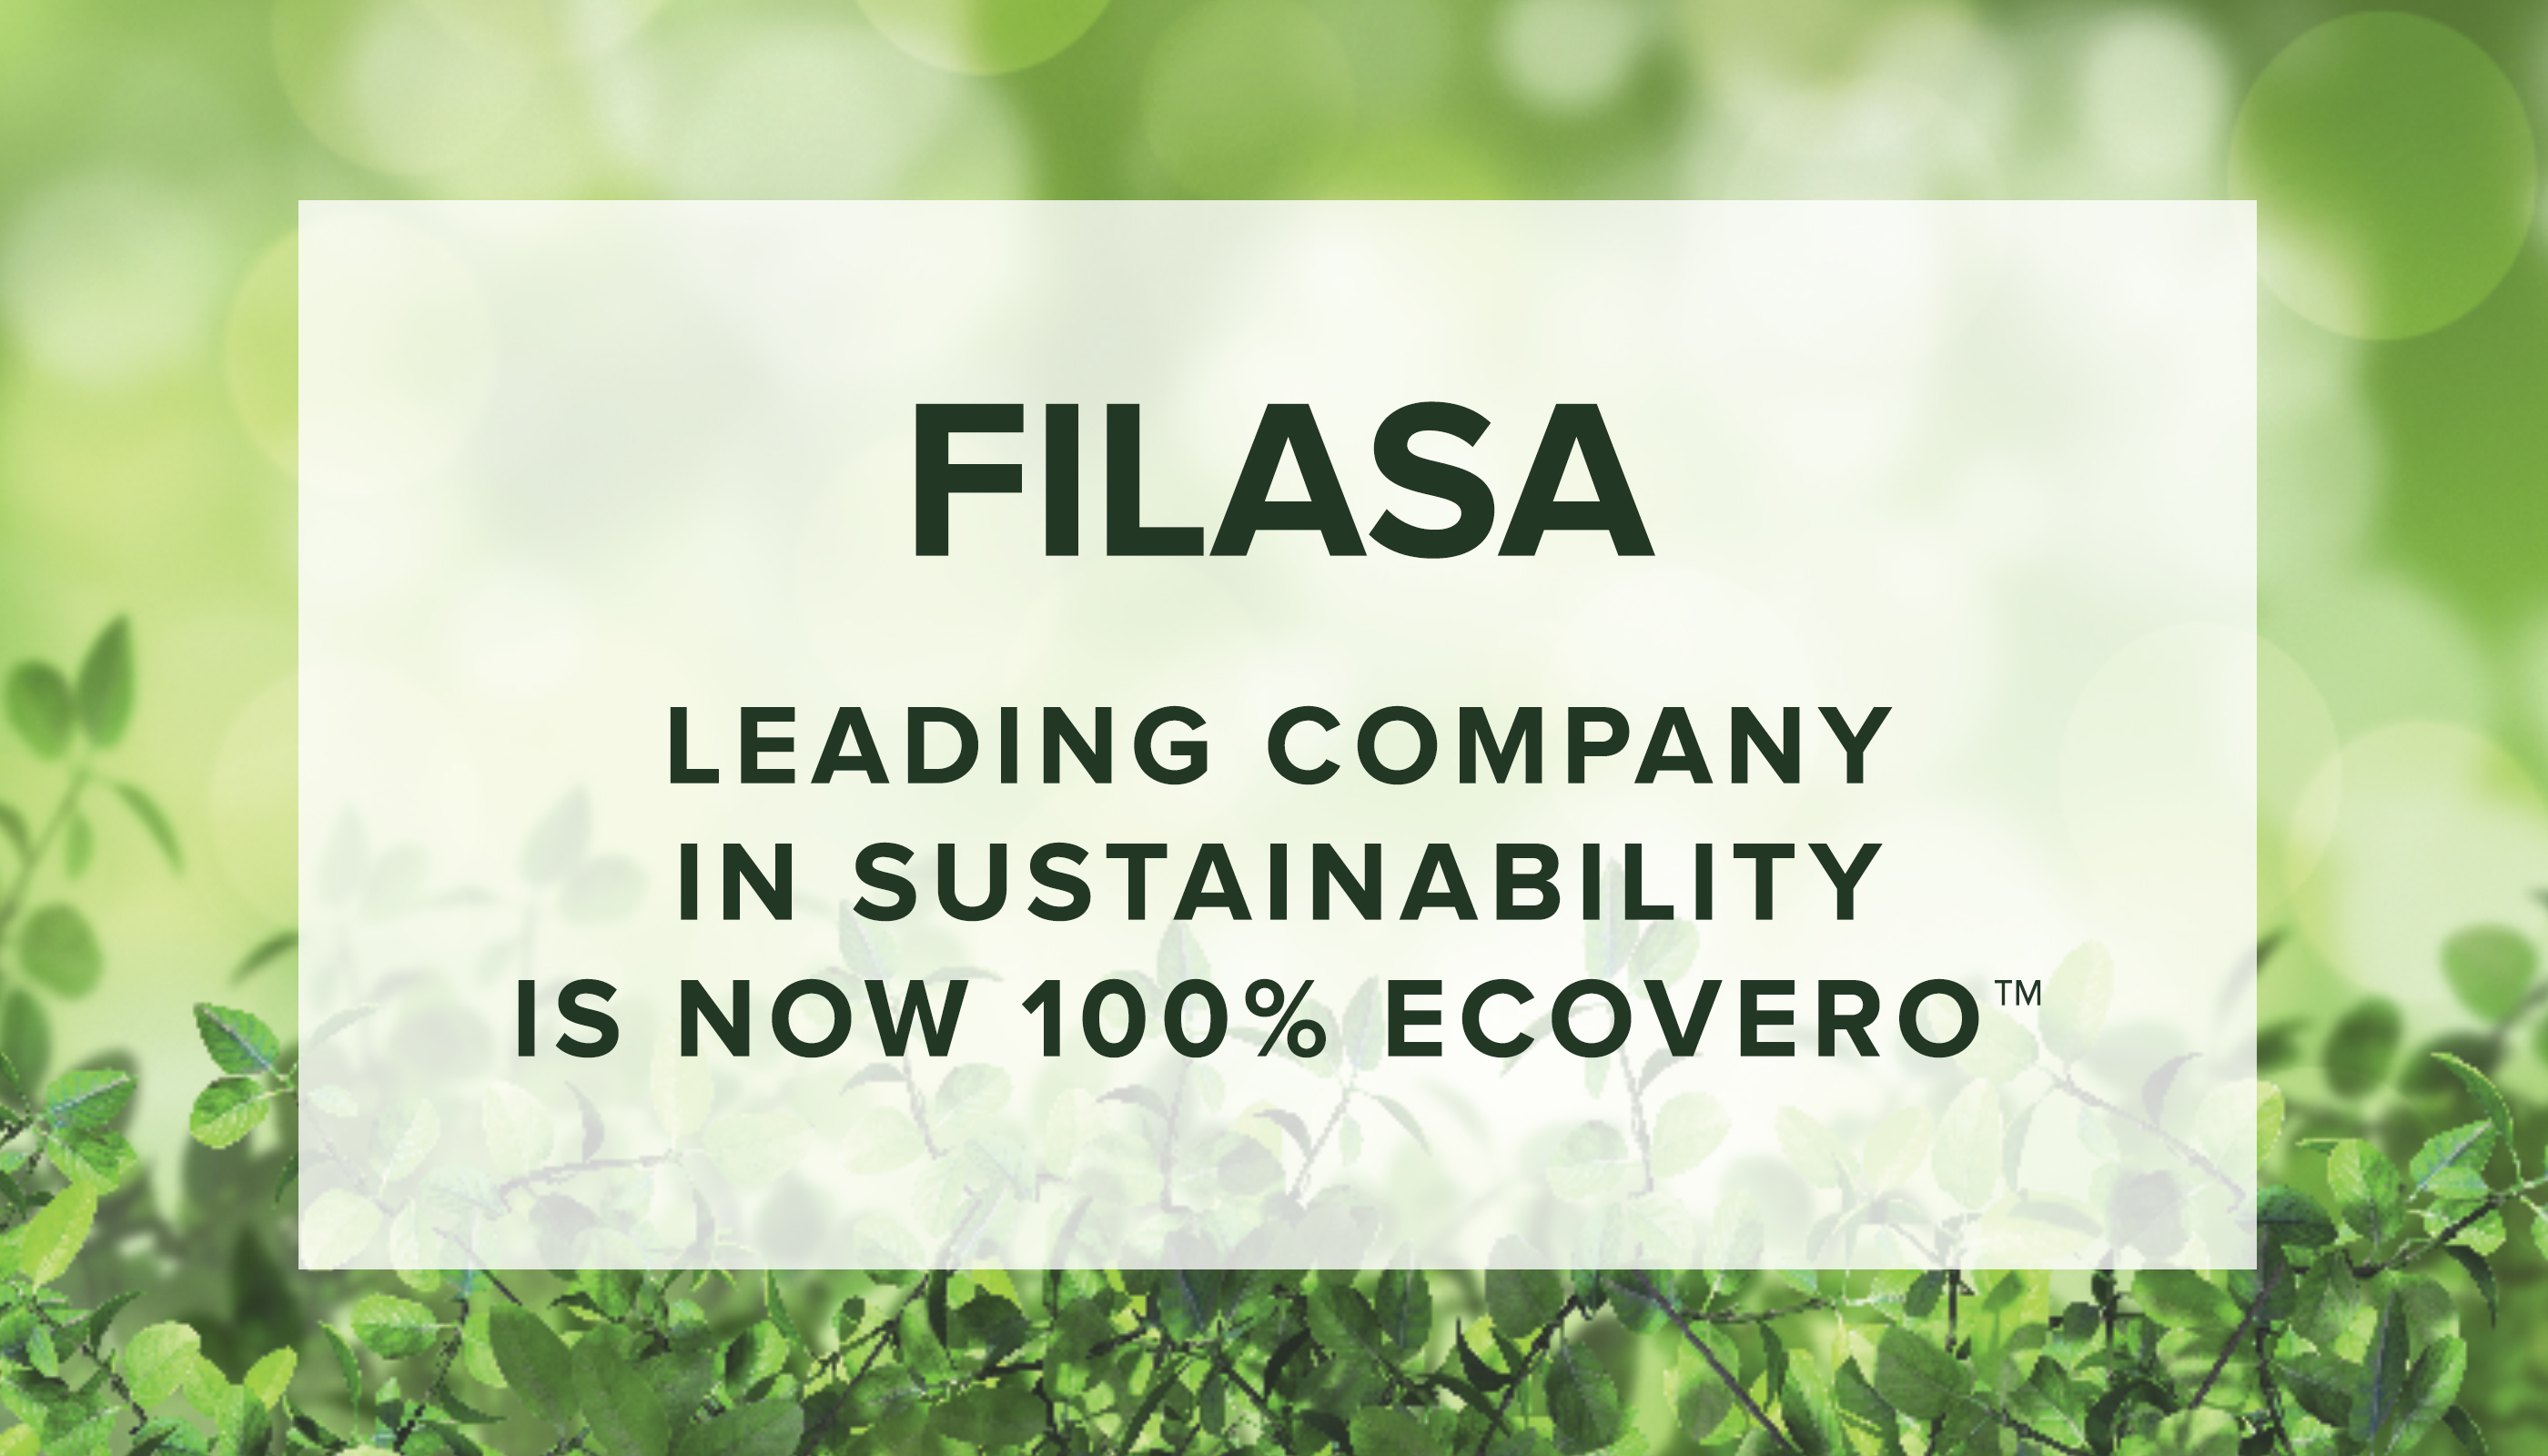 FILASA leading company in sustainability is now 100% EcoVero™